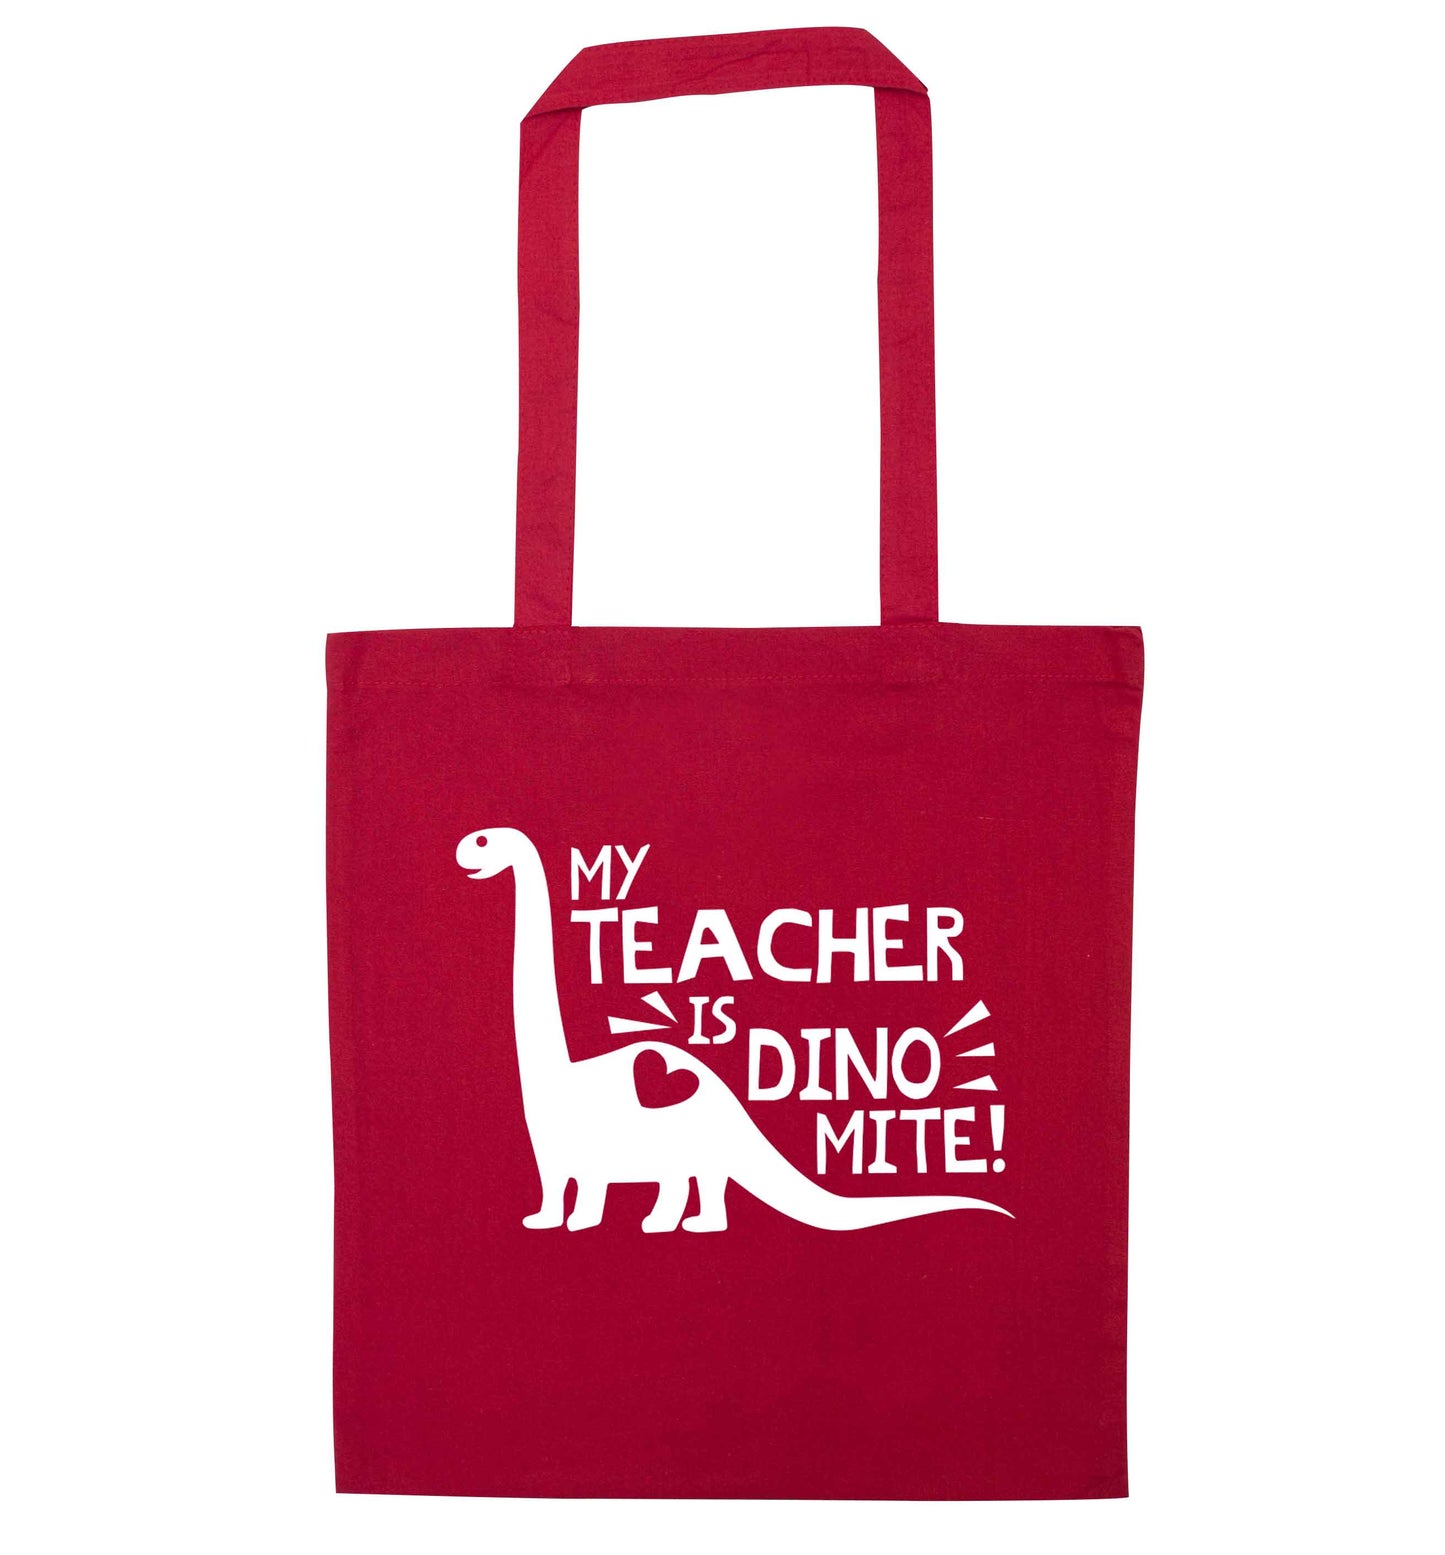 My teacher is dinomite! red tote bag